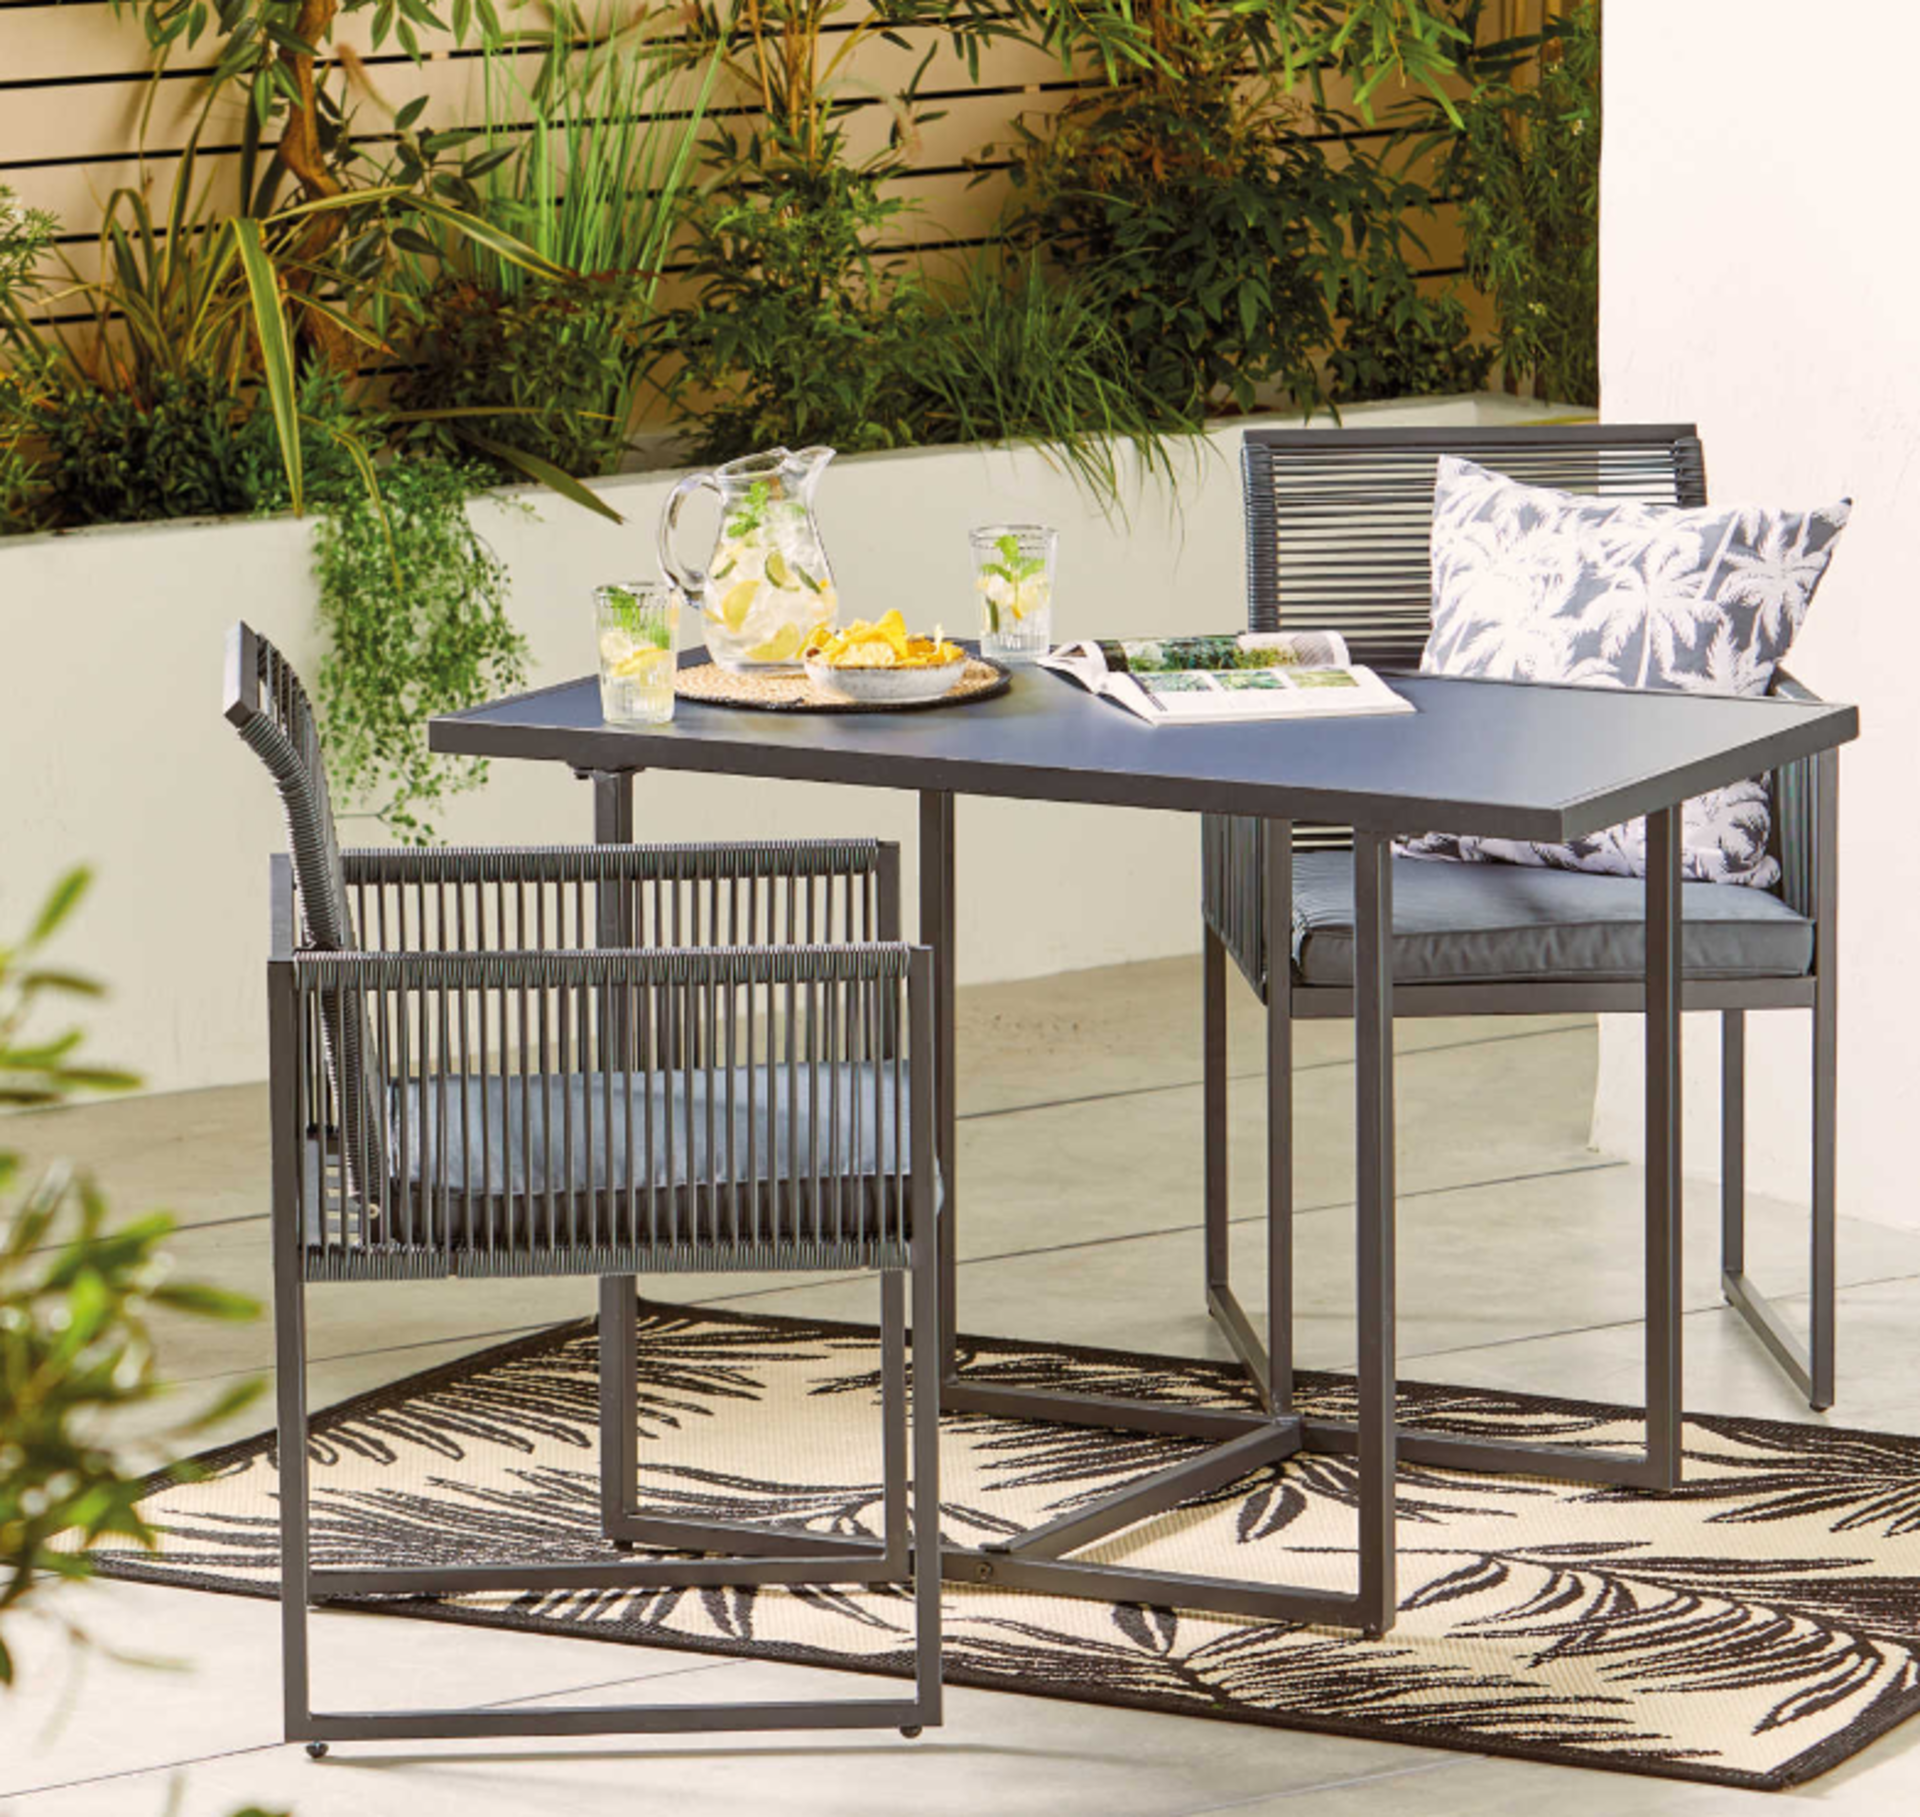 Luxury Rope Effect Bistro Set. Enjoy those lazy days in the garden with this comfortable and stylish